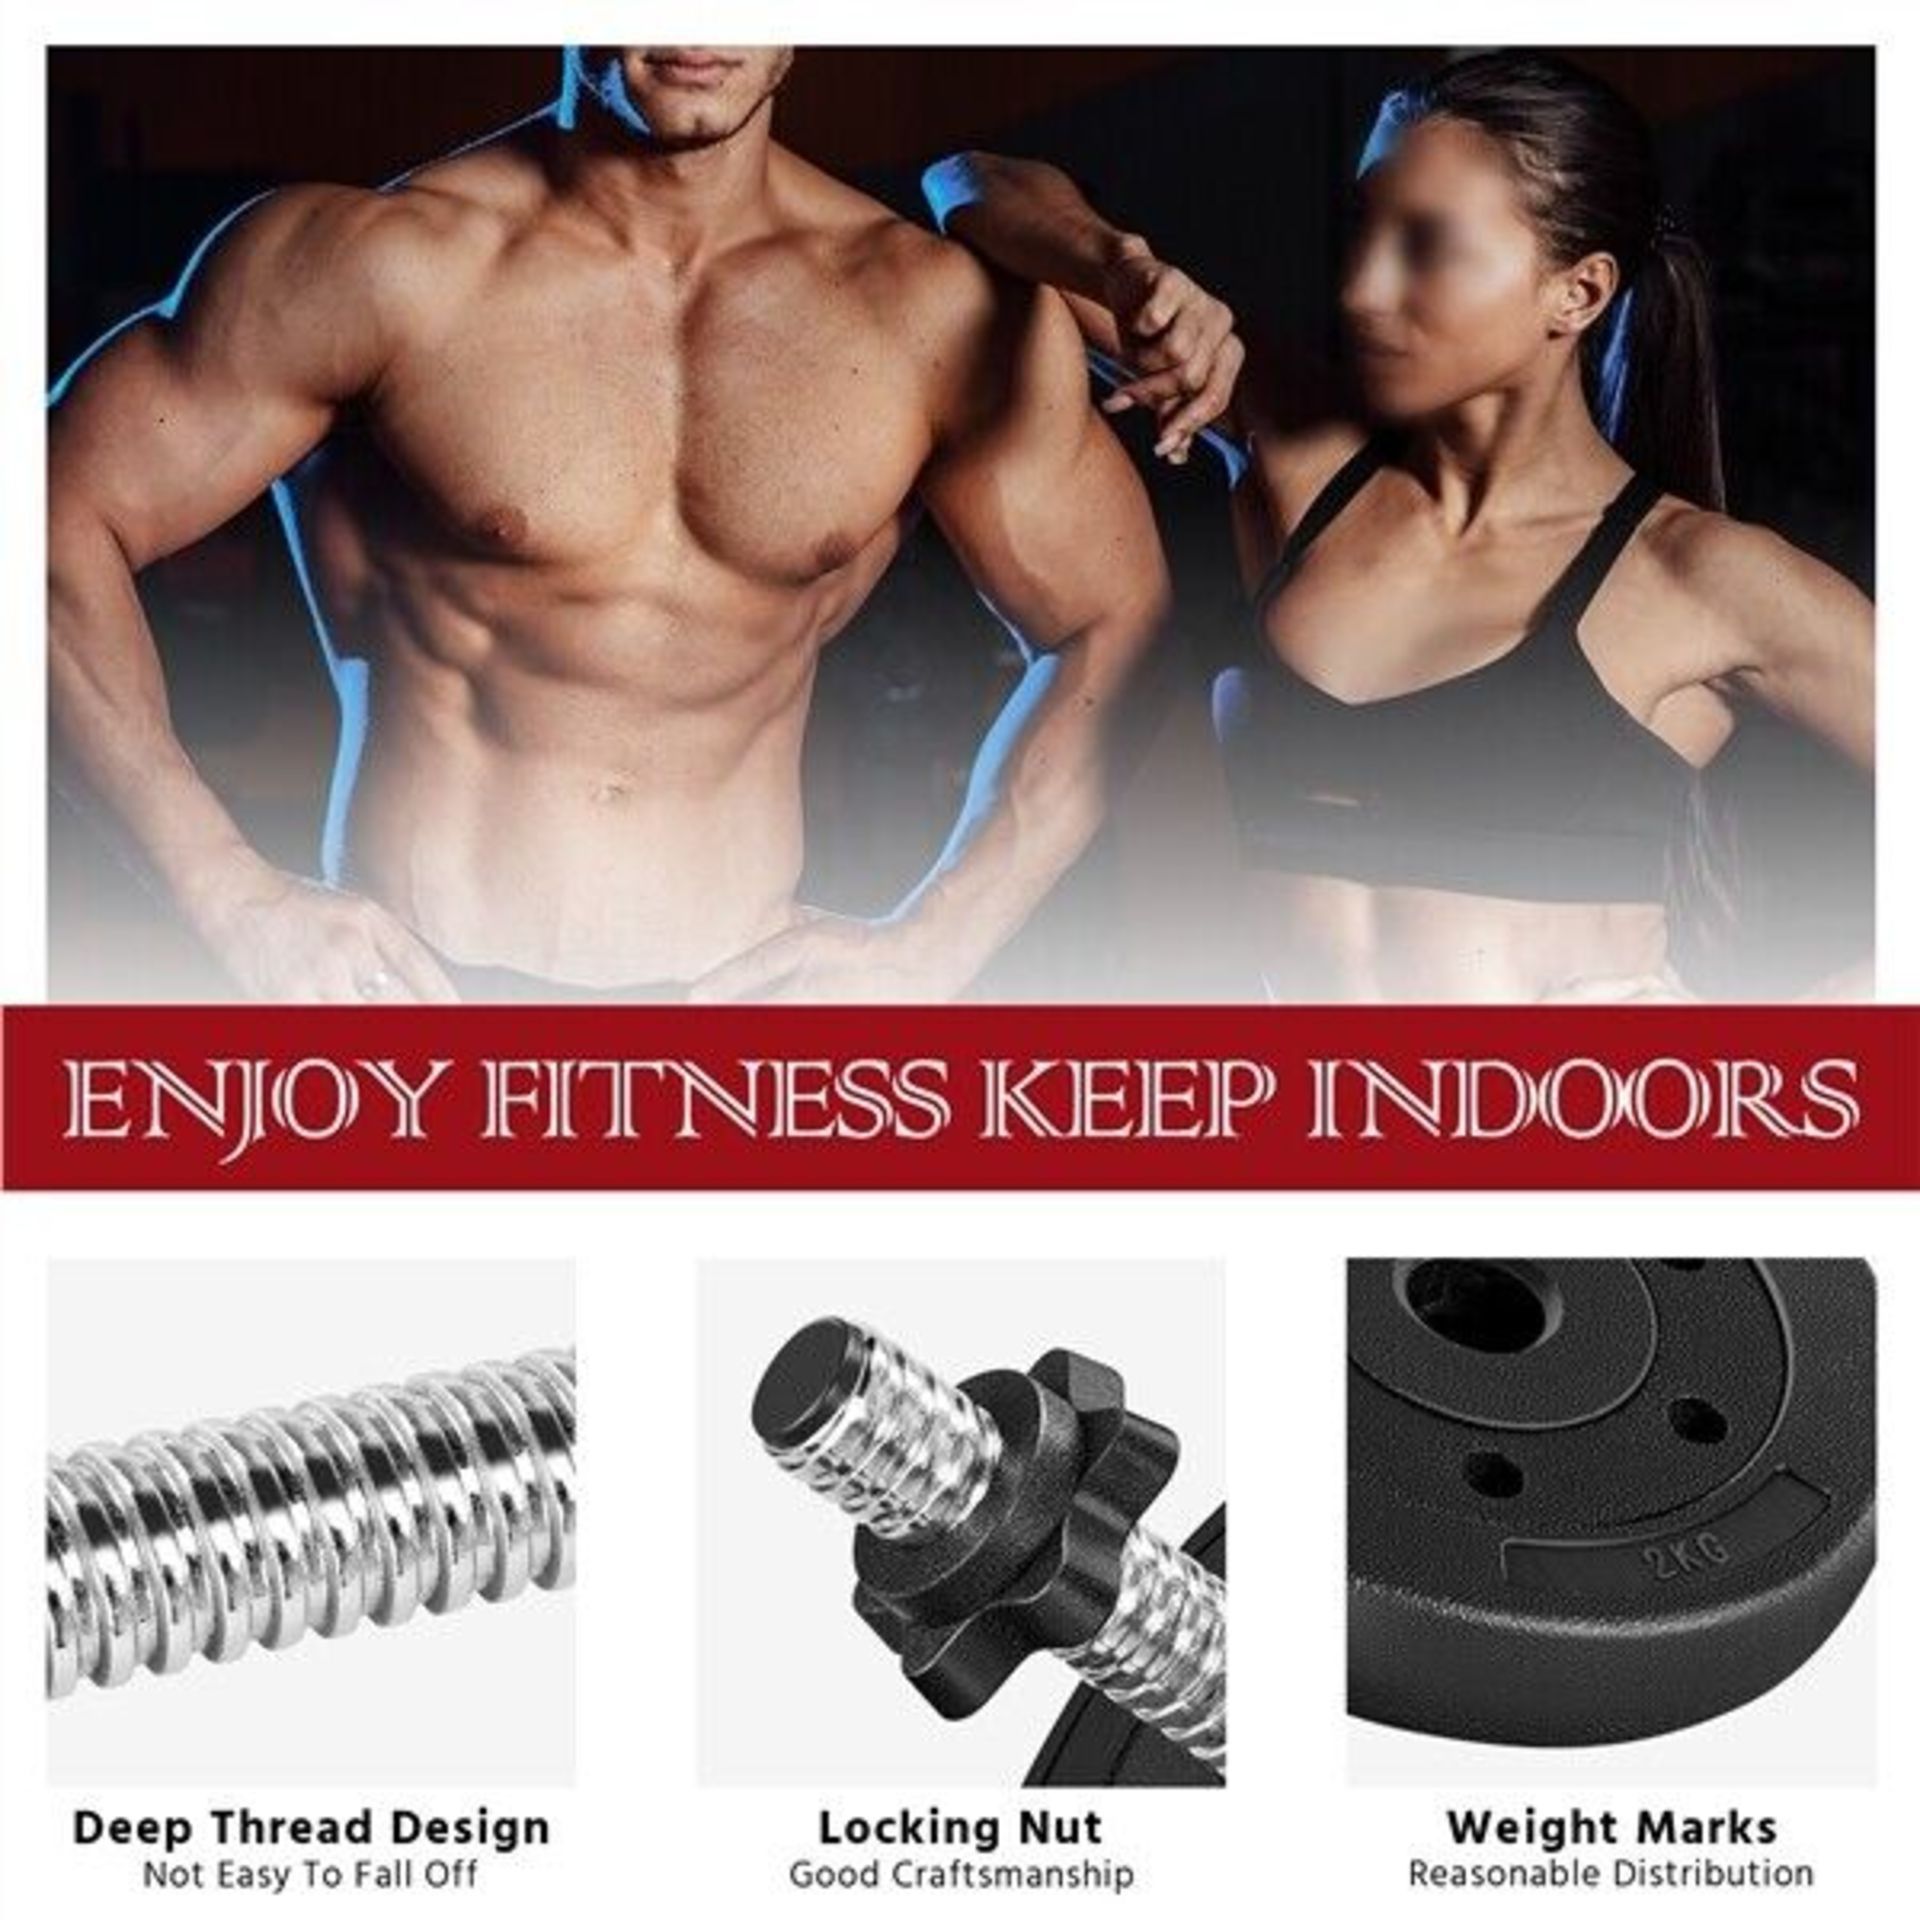 5 x SETS OF 2 - 20KG ADJUSTABLE WEIGHT DUMBBELL SETS. EACH SET INCLUDES: 4 X 3KG WEIGHTS, 2 X 2. - Image 4 of 6